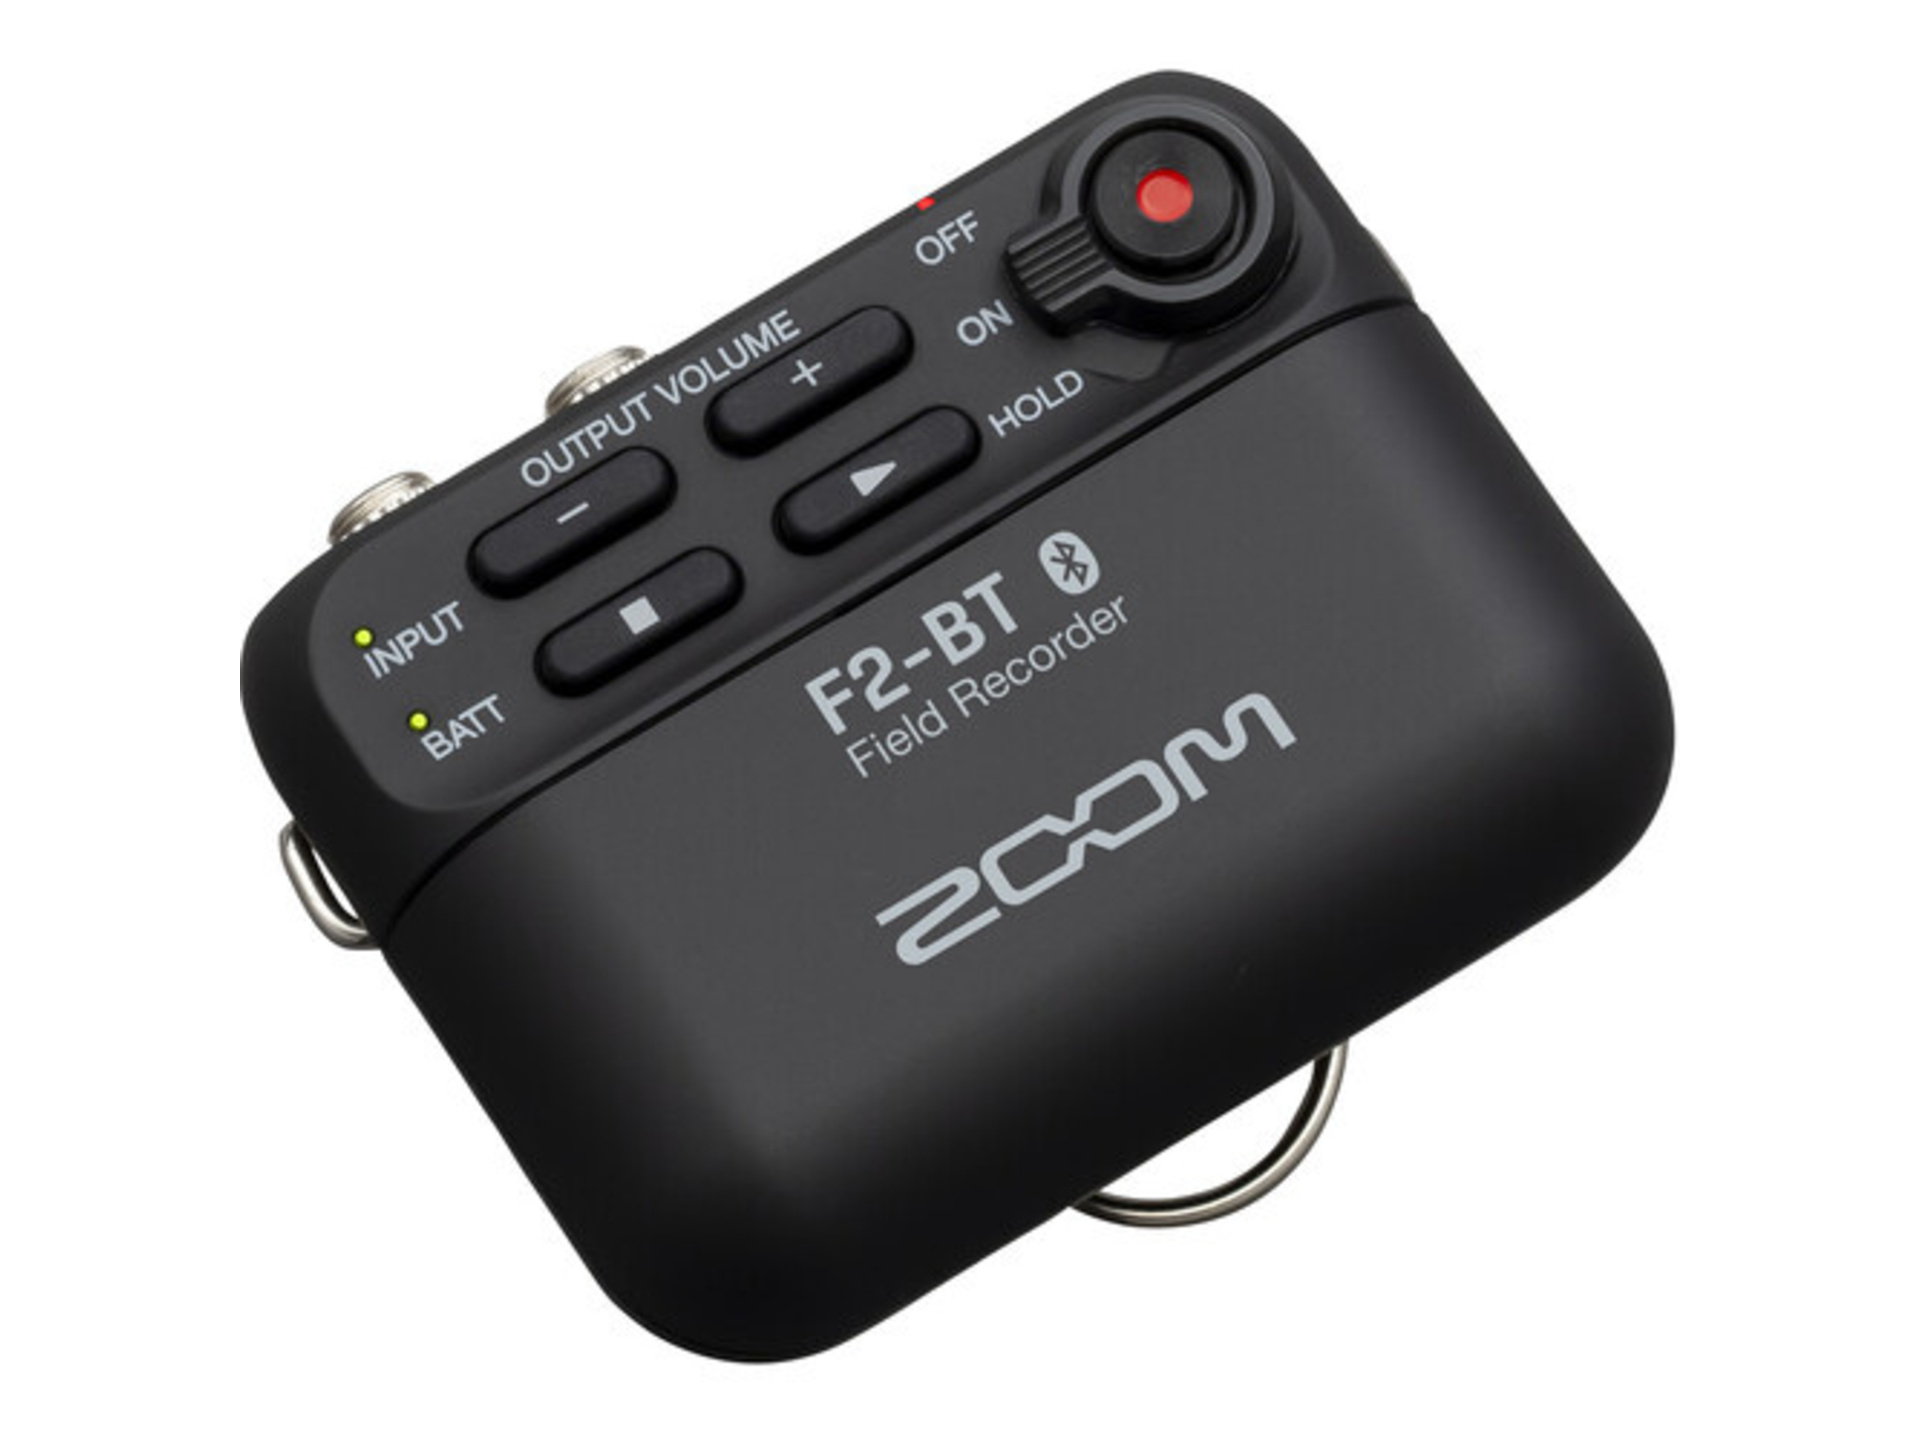 Zoom F2-BT Ultracompact Bluetooth-Enabled Portable Field Recorder with Lavalier Microphone